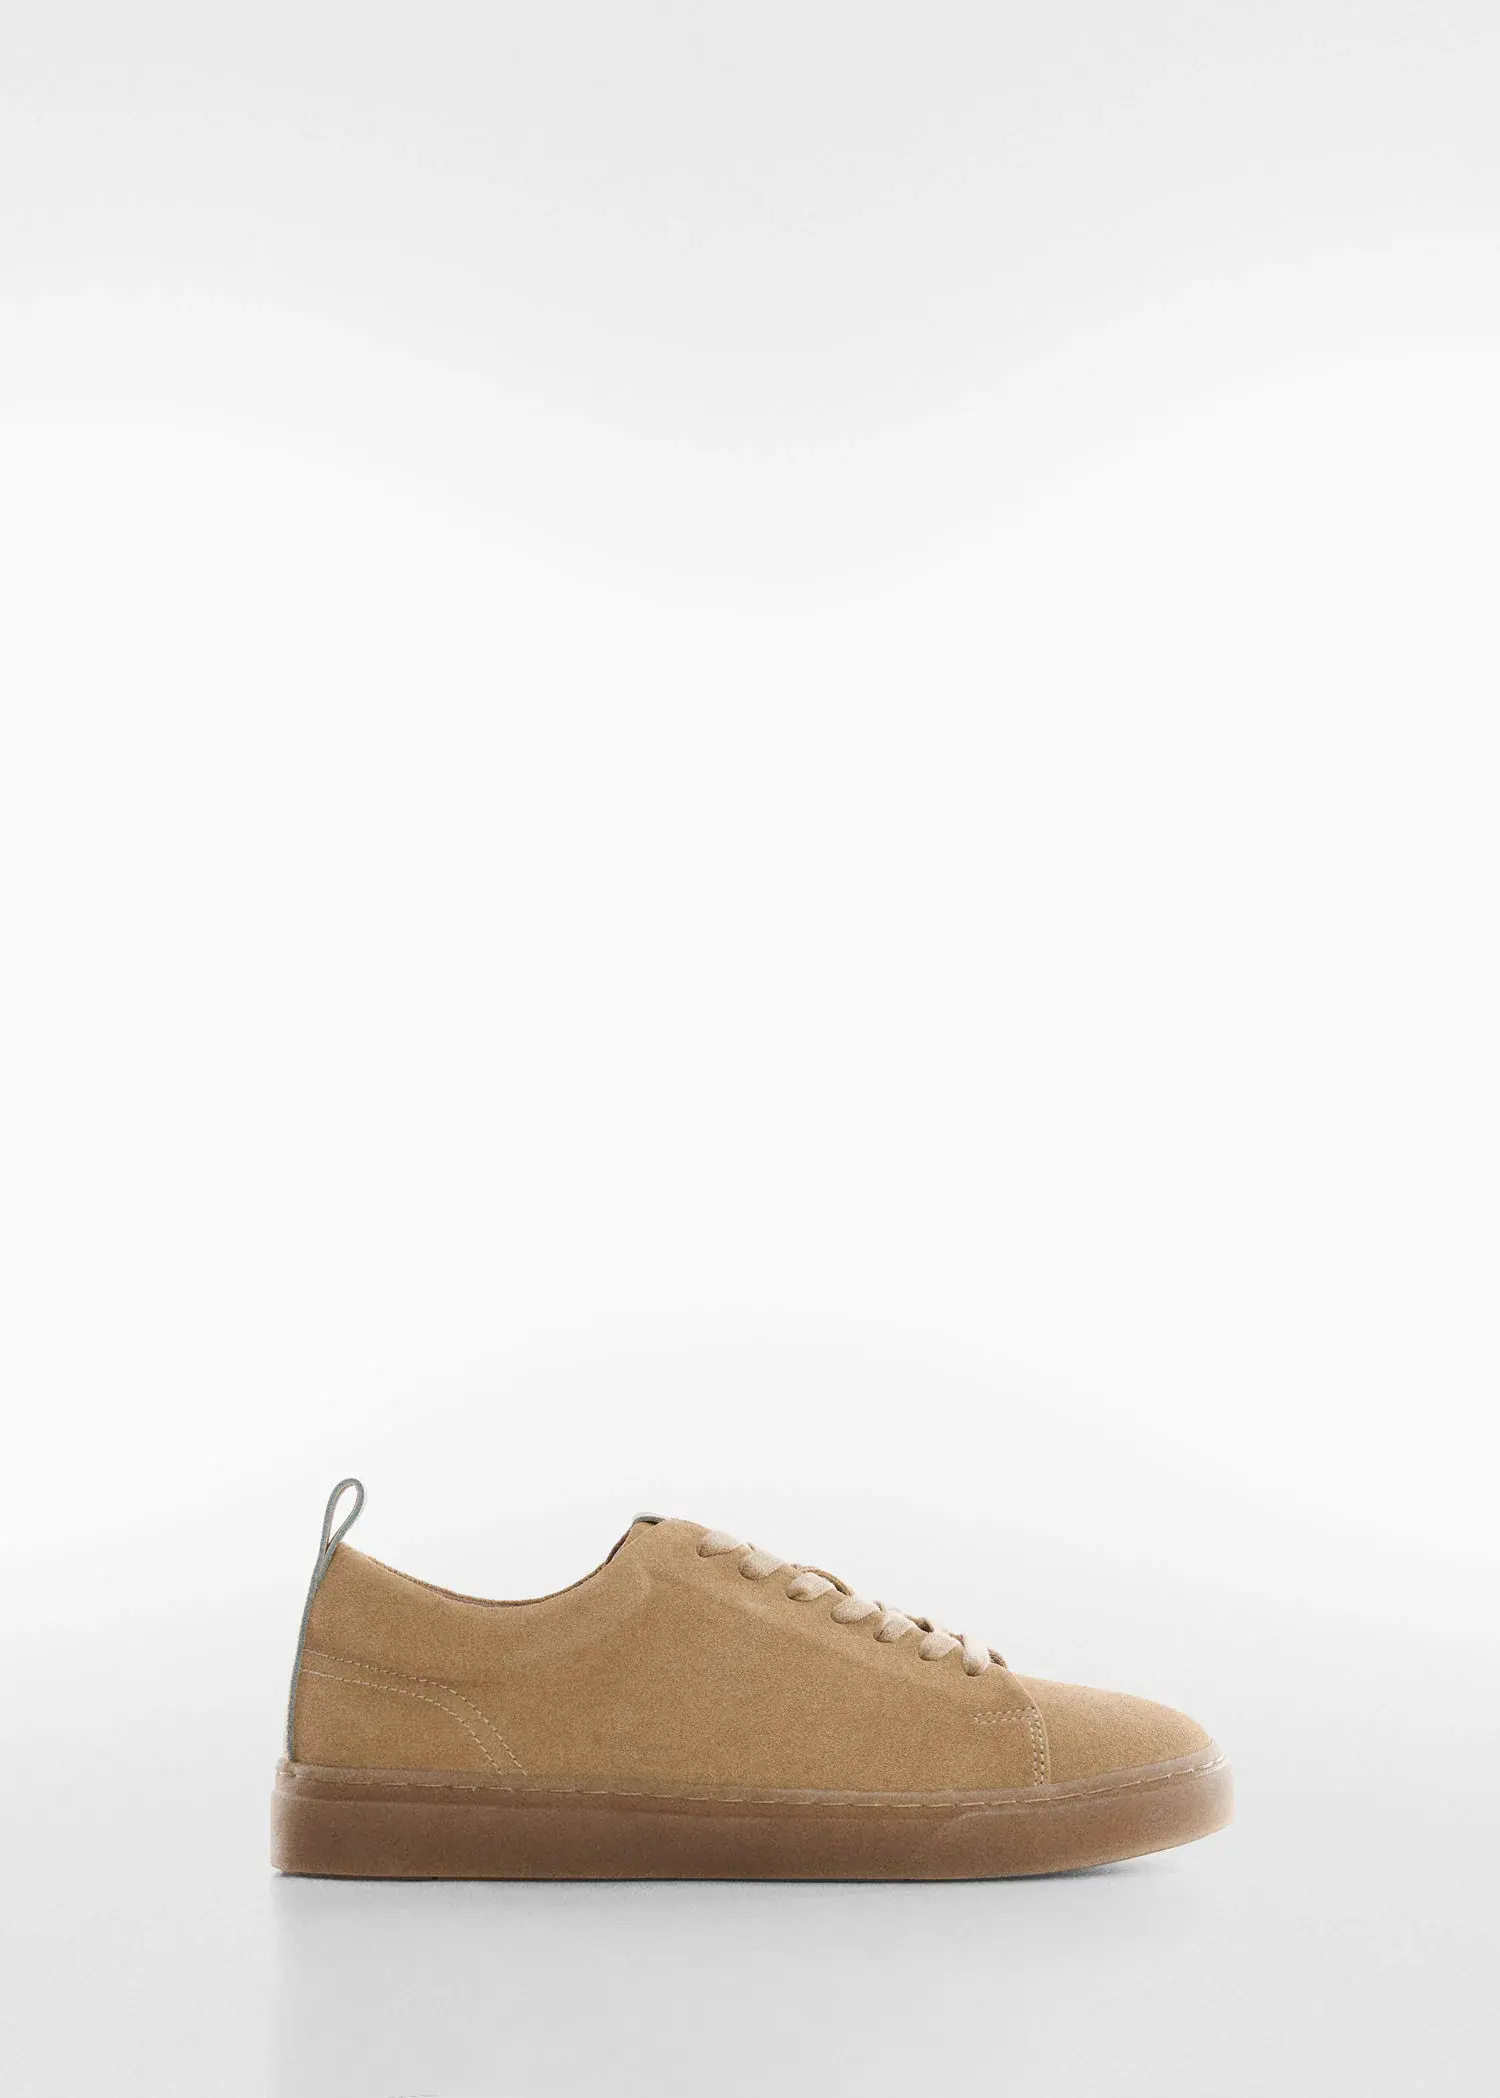 Mango Suede trainers. a pair of shoes that are sitting on the ground. 